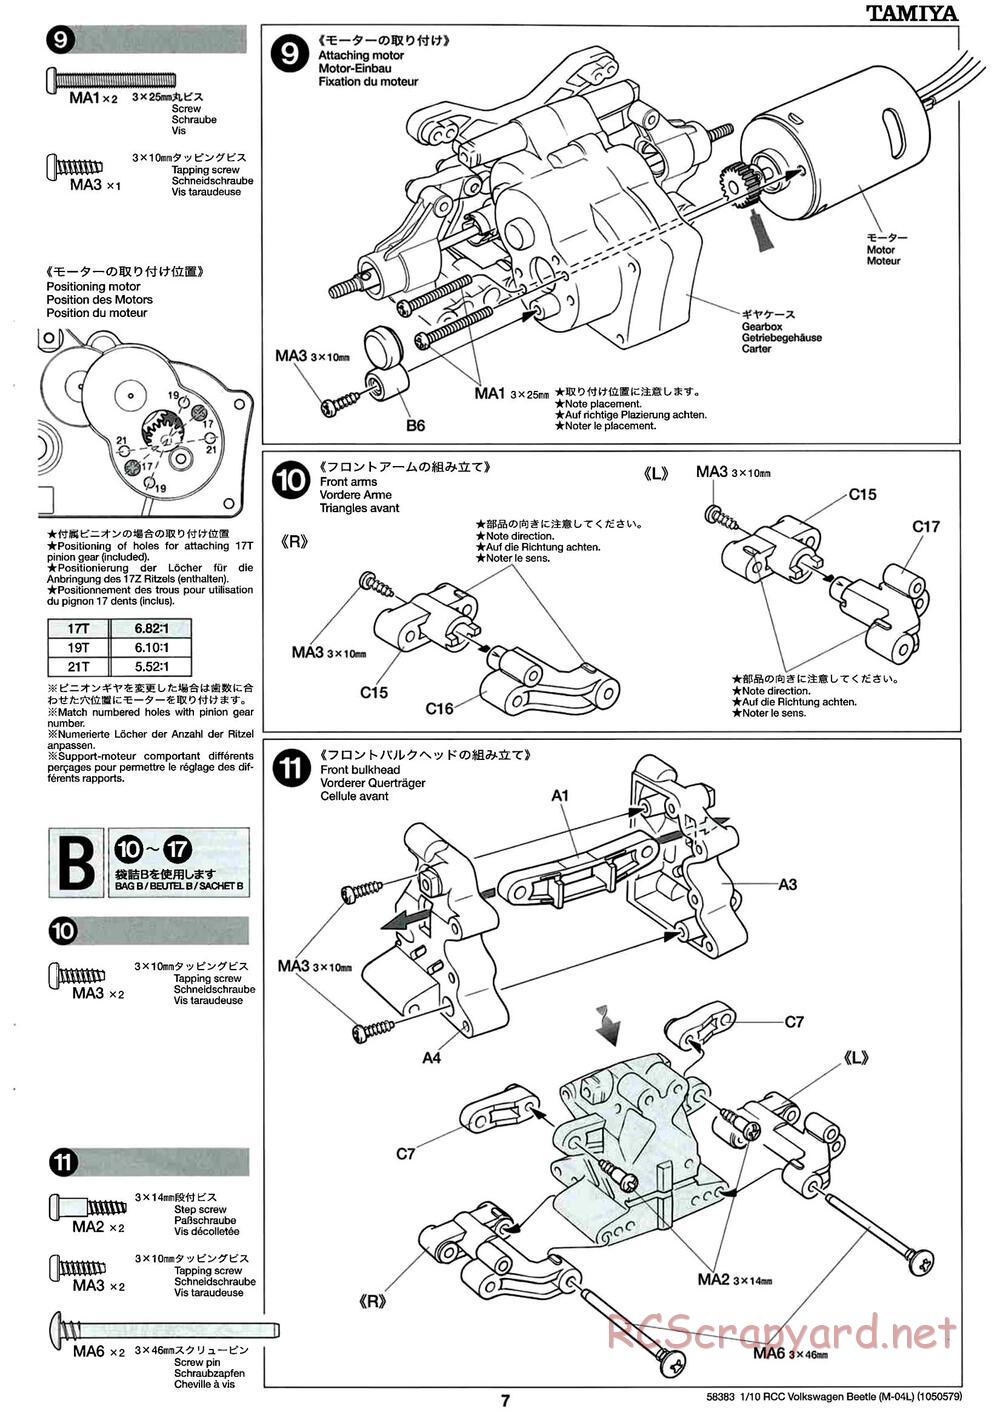 Tamiya - Volkswagen Beetle - M04L Chassis - Manual - Page 7